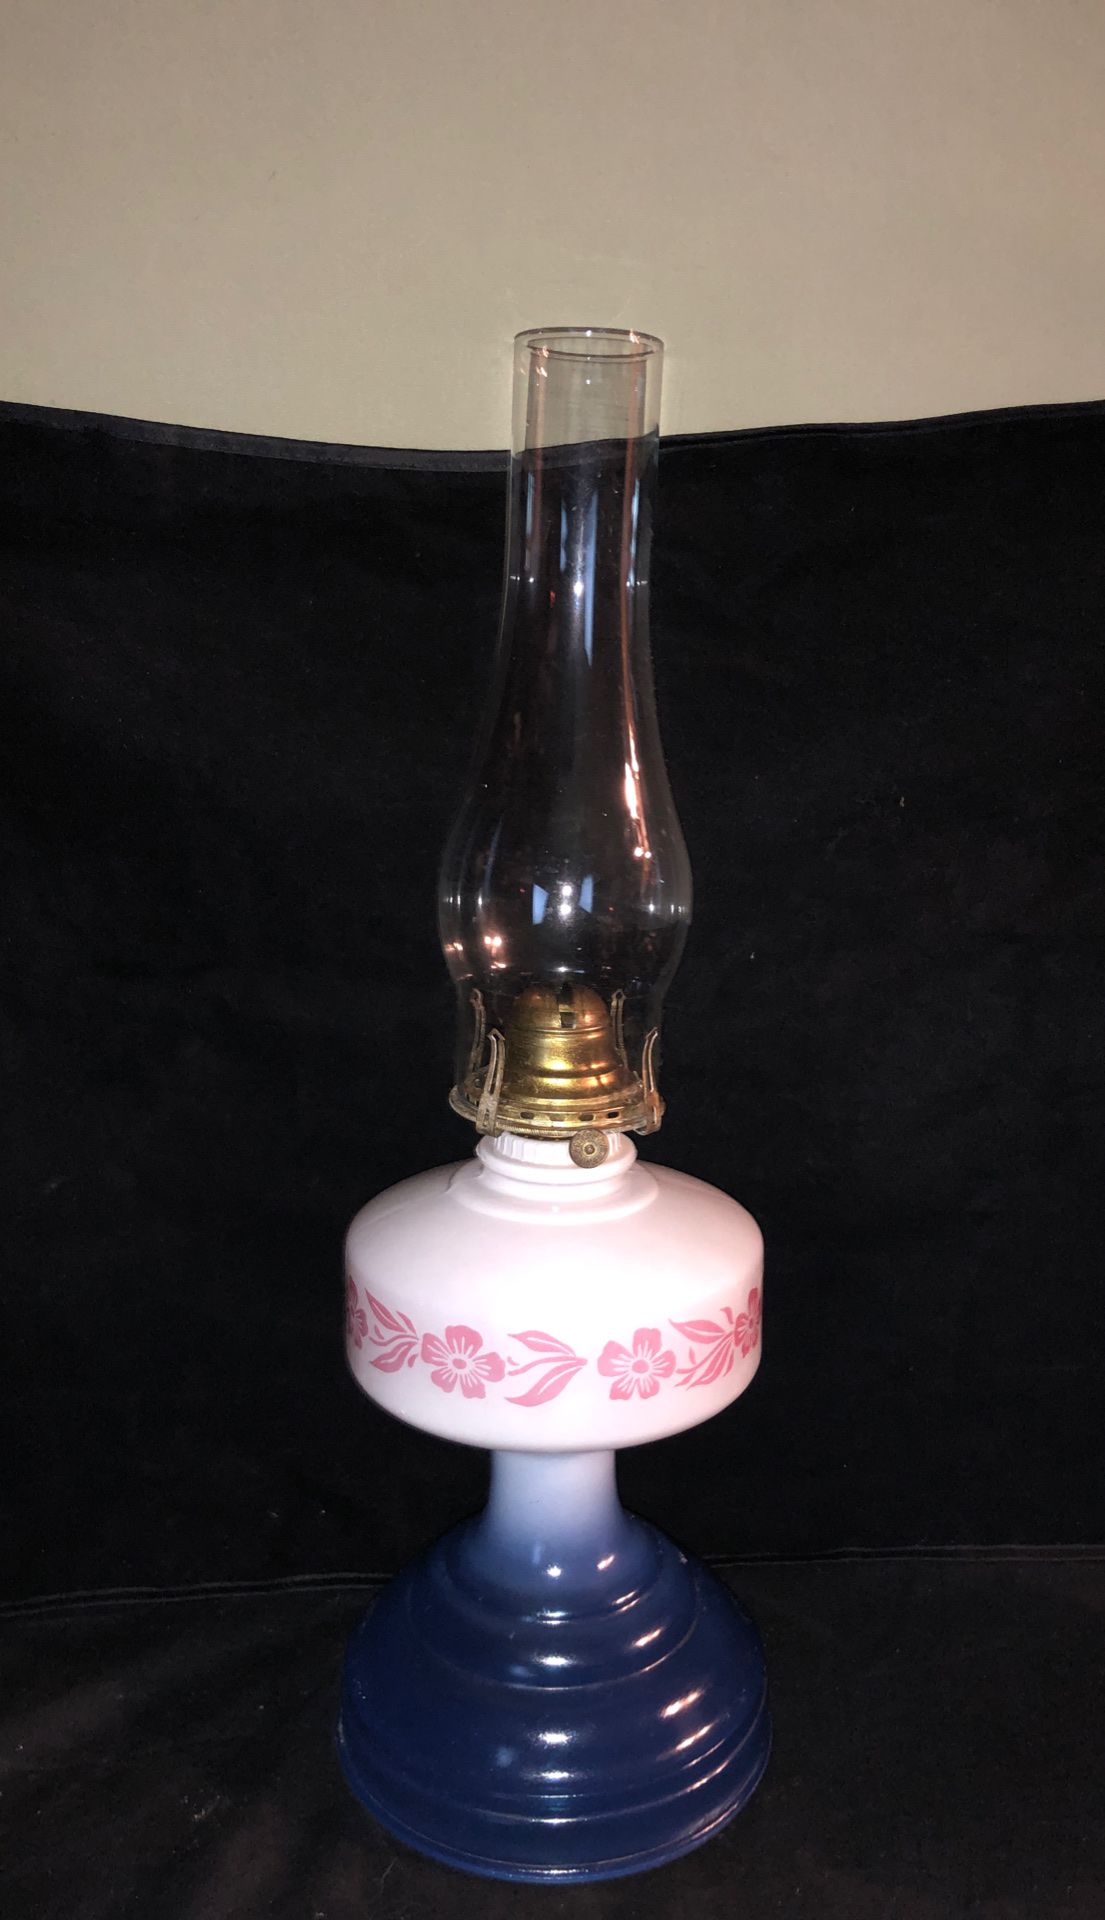 Plume & Atwood Risdon Antique Patriotic color oil lamp w/ eagle burner and clear chimney